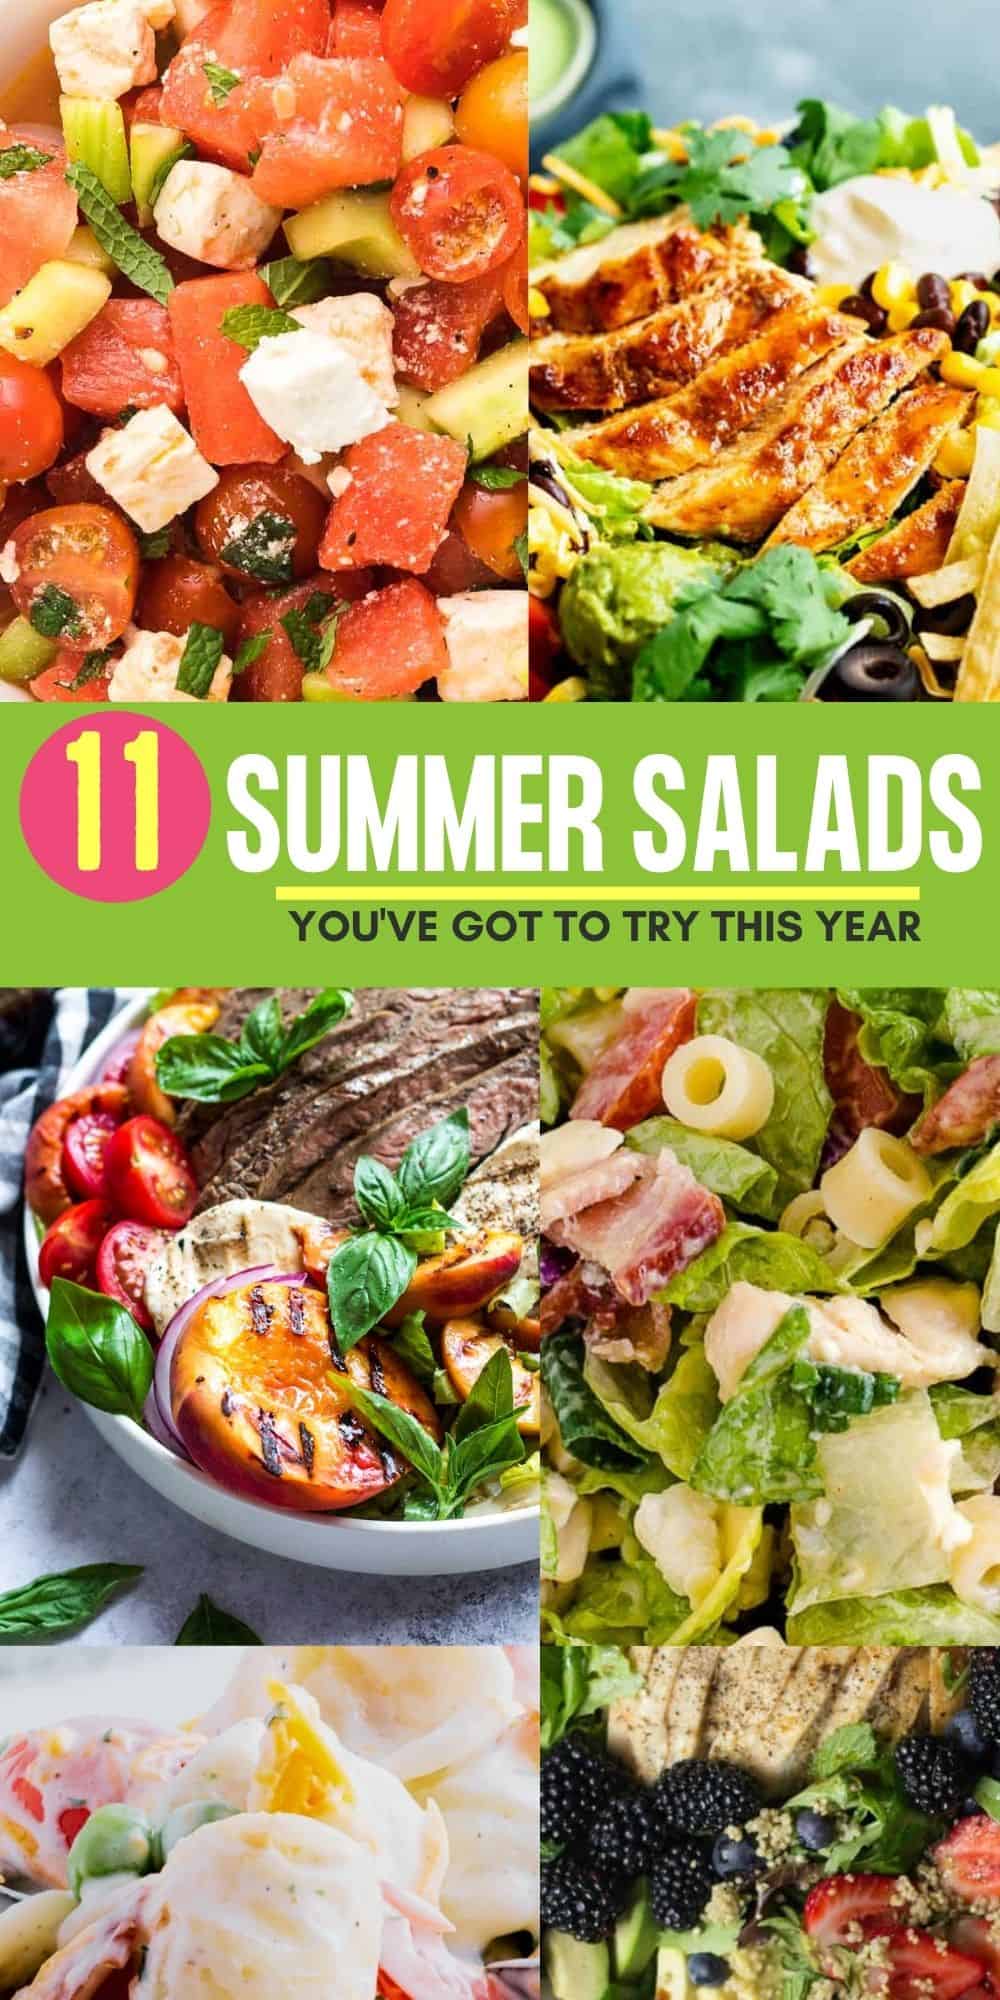 11 Easy and Delicious Summer Salad Recipes. Tossed green salads with proteins and tons of delicious toppings make the perfect dinner meal on a hot summer night. They’re light, refreshing, and can be so flavorful whenusing the right ingredients. #cheerfulcook #summersalad #recipe #salads  via @cheerfulcook